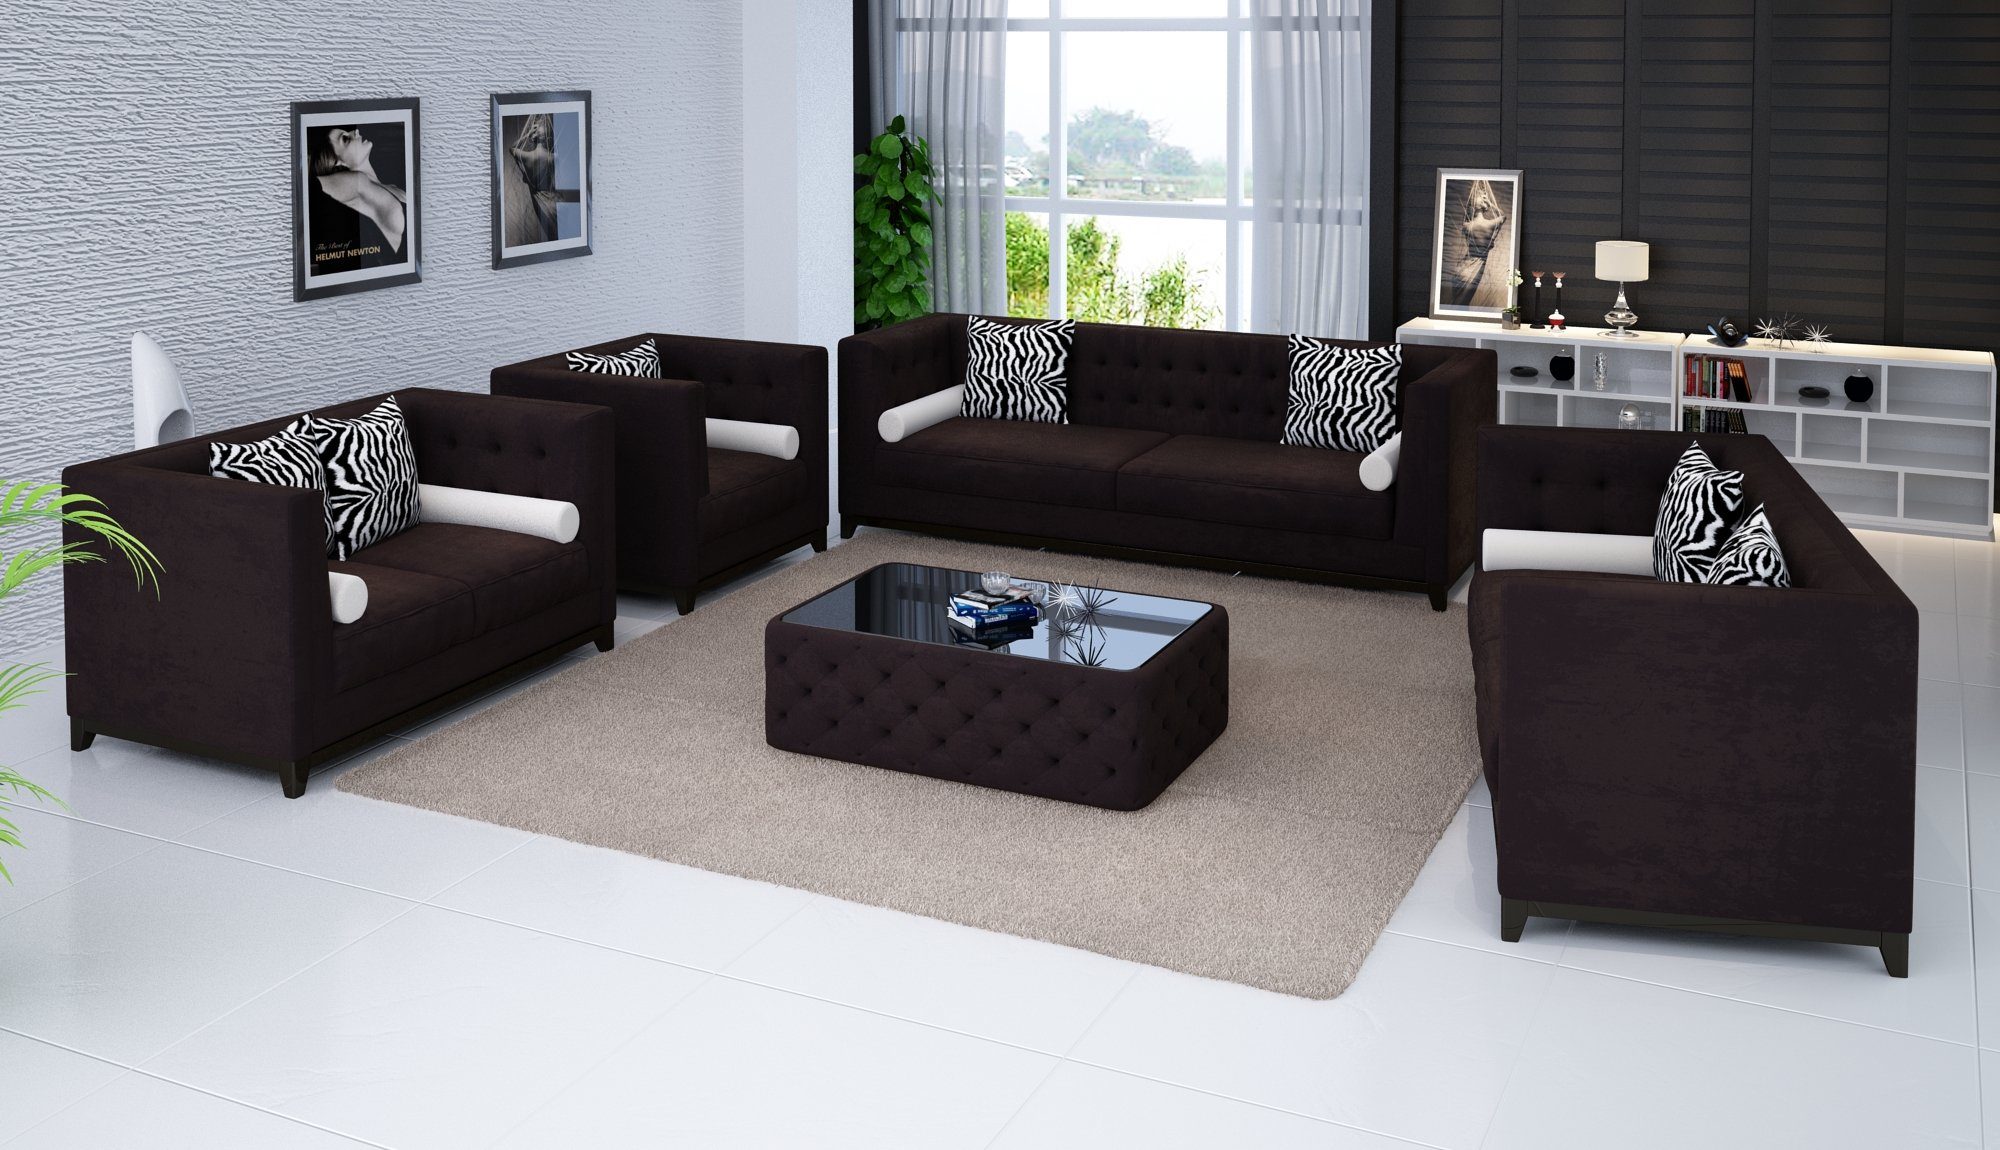 Sessel, Sofa in Couch Couchen Chesterfield 3tlg JVmoebel Sofa Sofagarnitur Rote Europe Braun Made